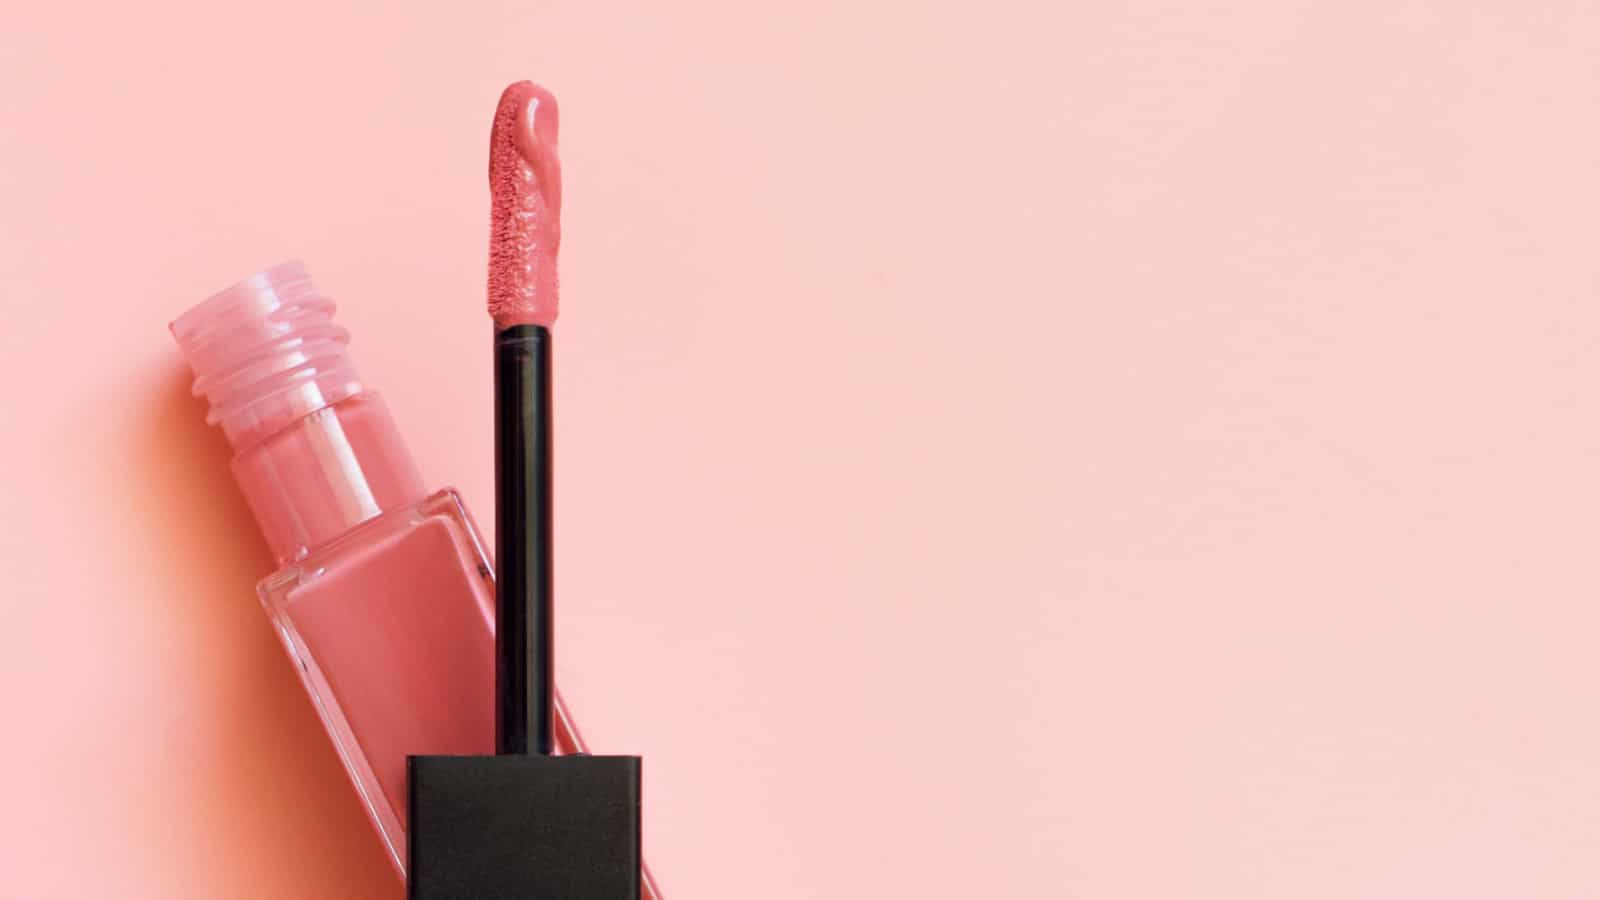 Liquid lipstick and applicator on pink color background. Open tube of lip gloss and wand brush with makeup product on pastel coral surface. Top view, flat lay, copy space